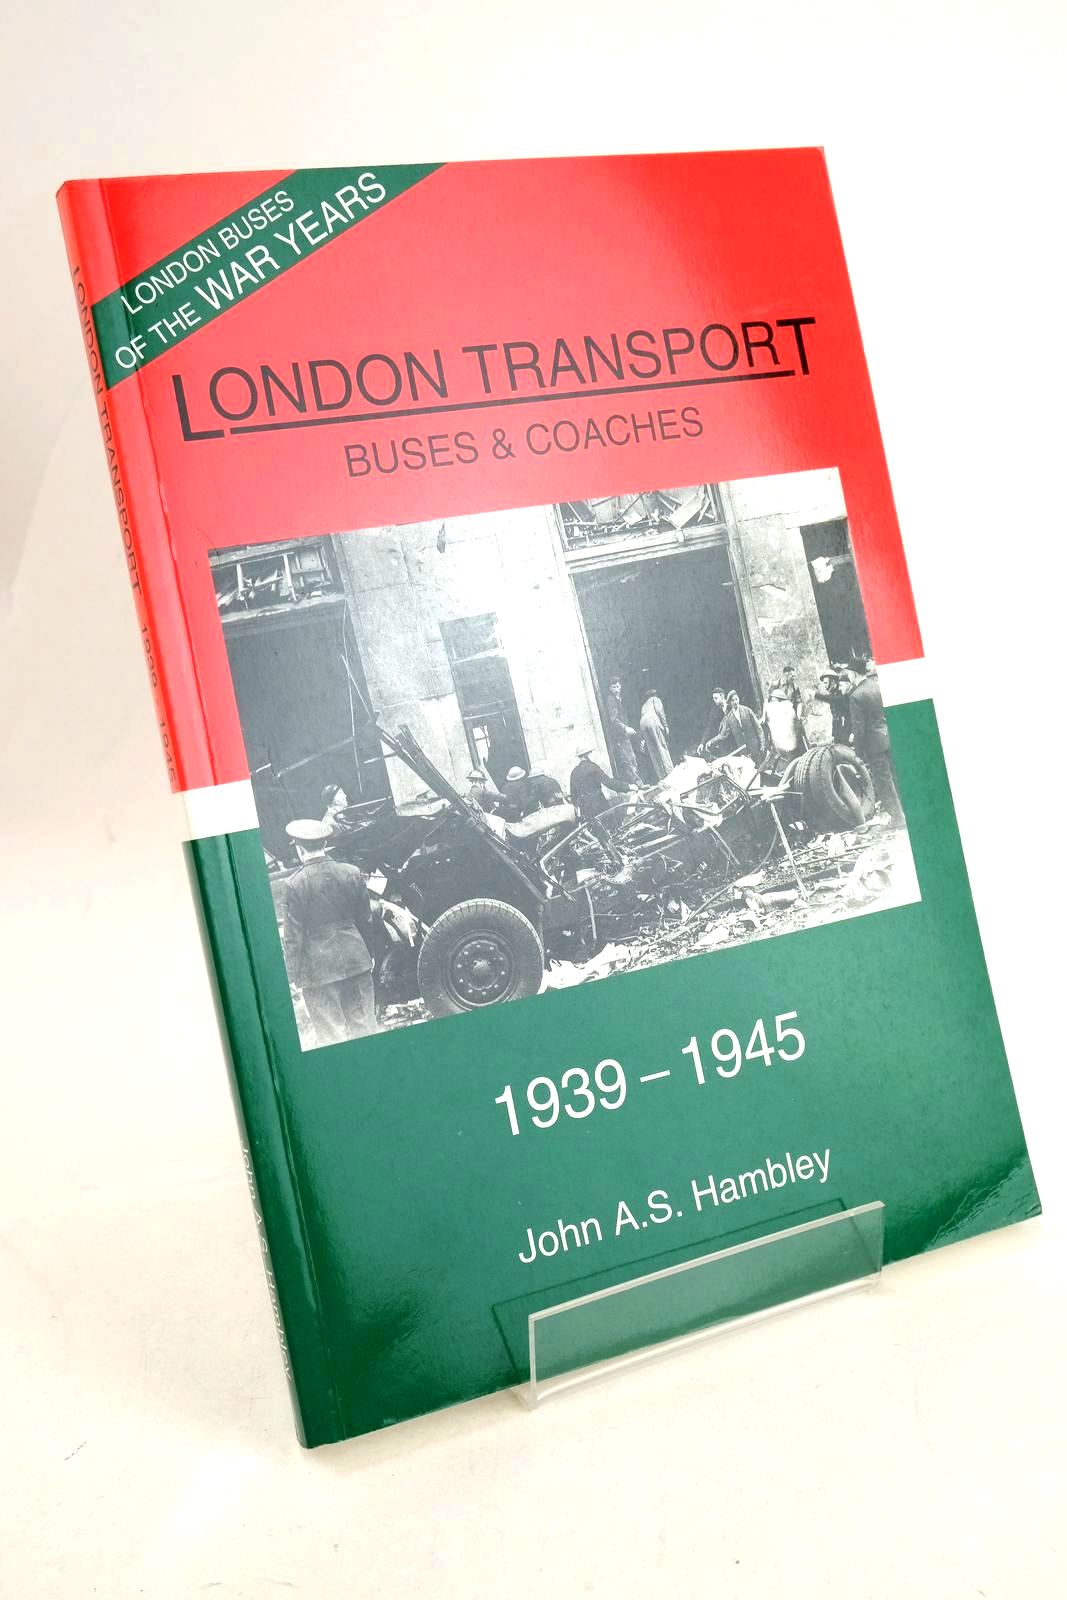 Photo of LONDON TRANSPORT BUSES & COACHES 1939-1945 written by Hambley, John A.S. published by Images Publishing (STOCK CODE: 1327377)  for sale by Stella & Rose's Books